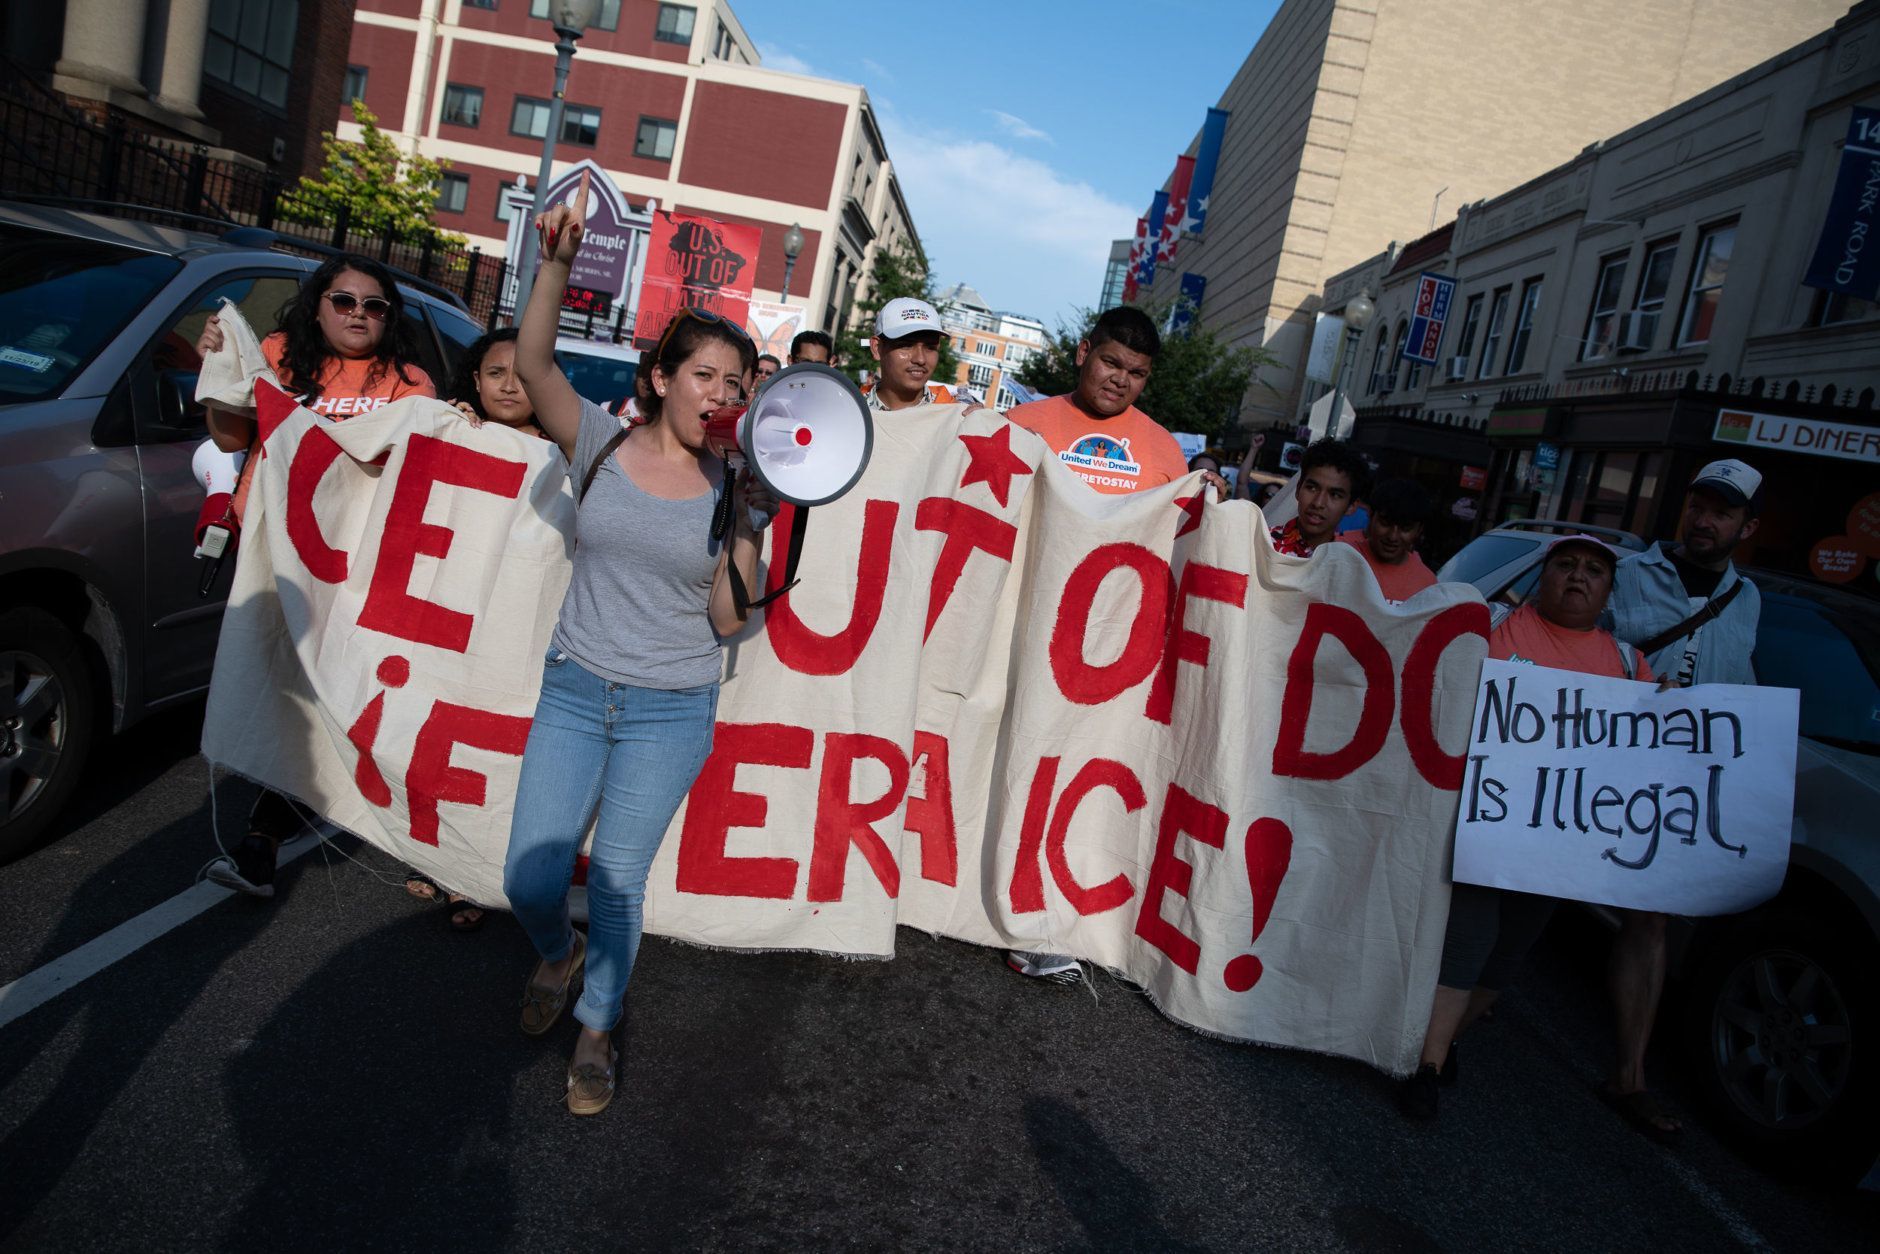 D.C. immigrant advocacy groups and their allies rallied in Columbia Heights and Adams Morgan on June 29, 2019, demanding Mayor Muriel Bowser and the D.C. Council enforce the city's status as a "sanctuary city" and not cooperate with federal law enforcement in detaining undocumented migrants. (WTOP/Alejandro Alvarez)